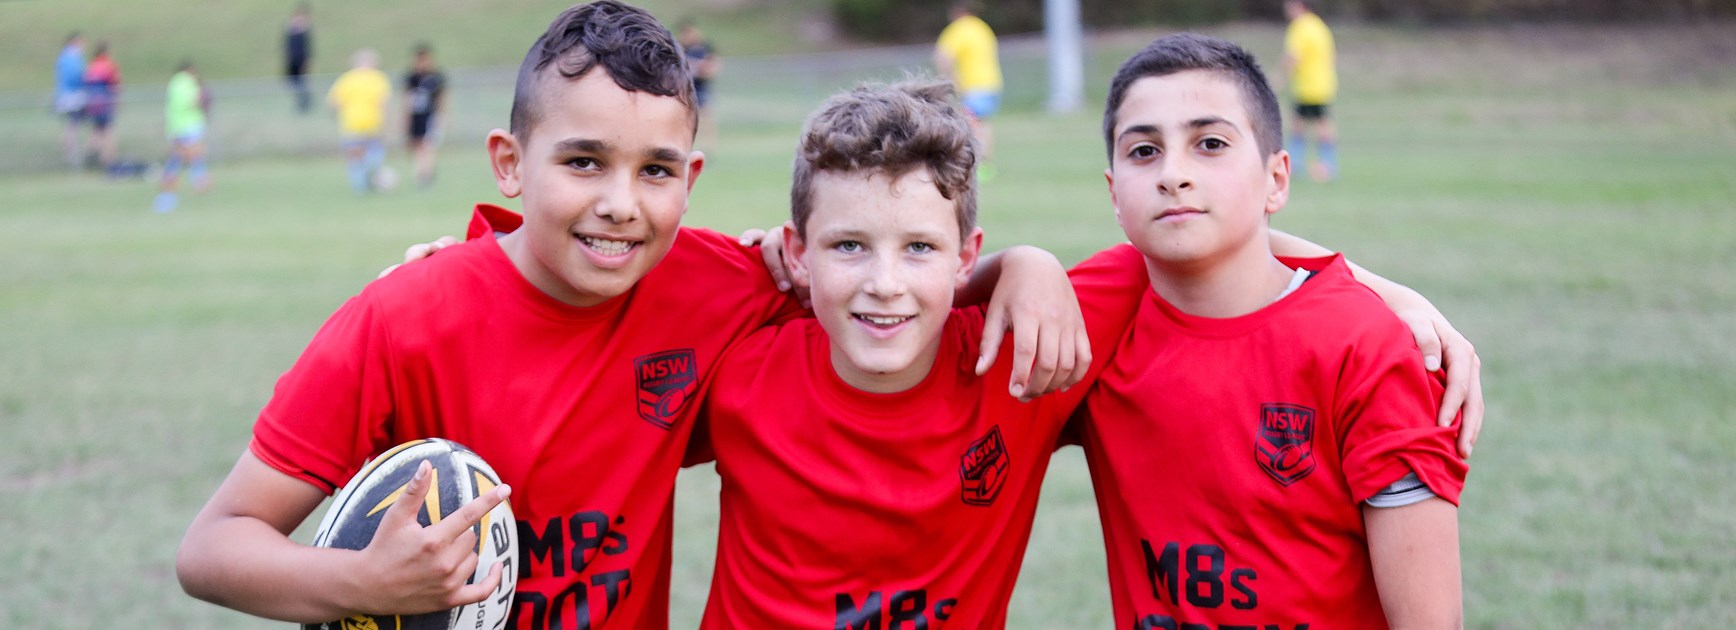 Take part in the M8s footy program!